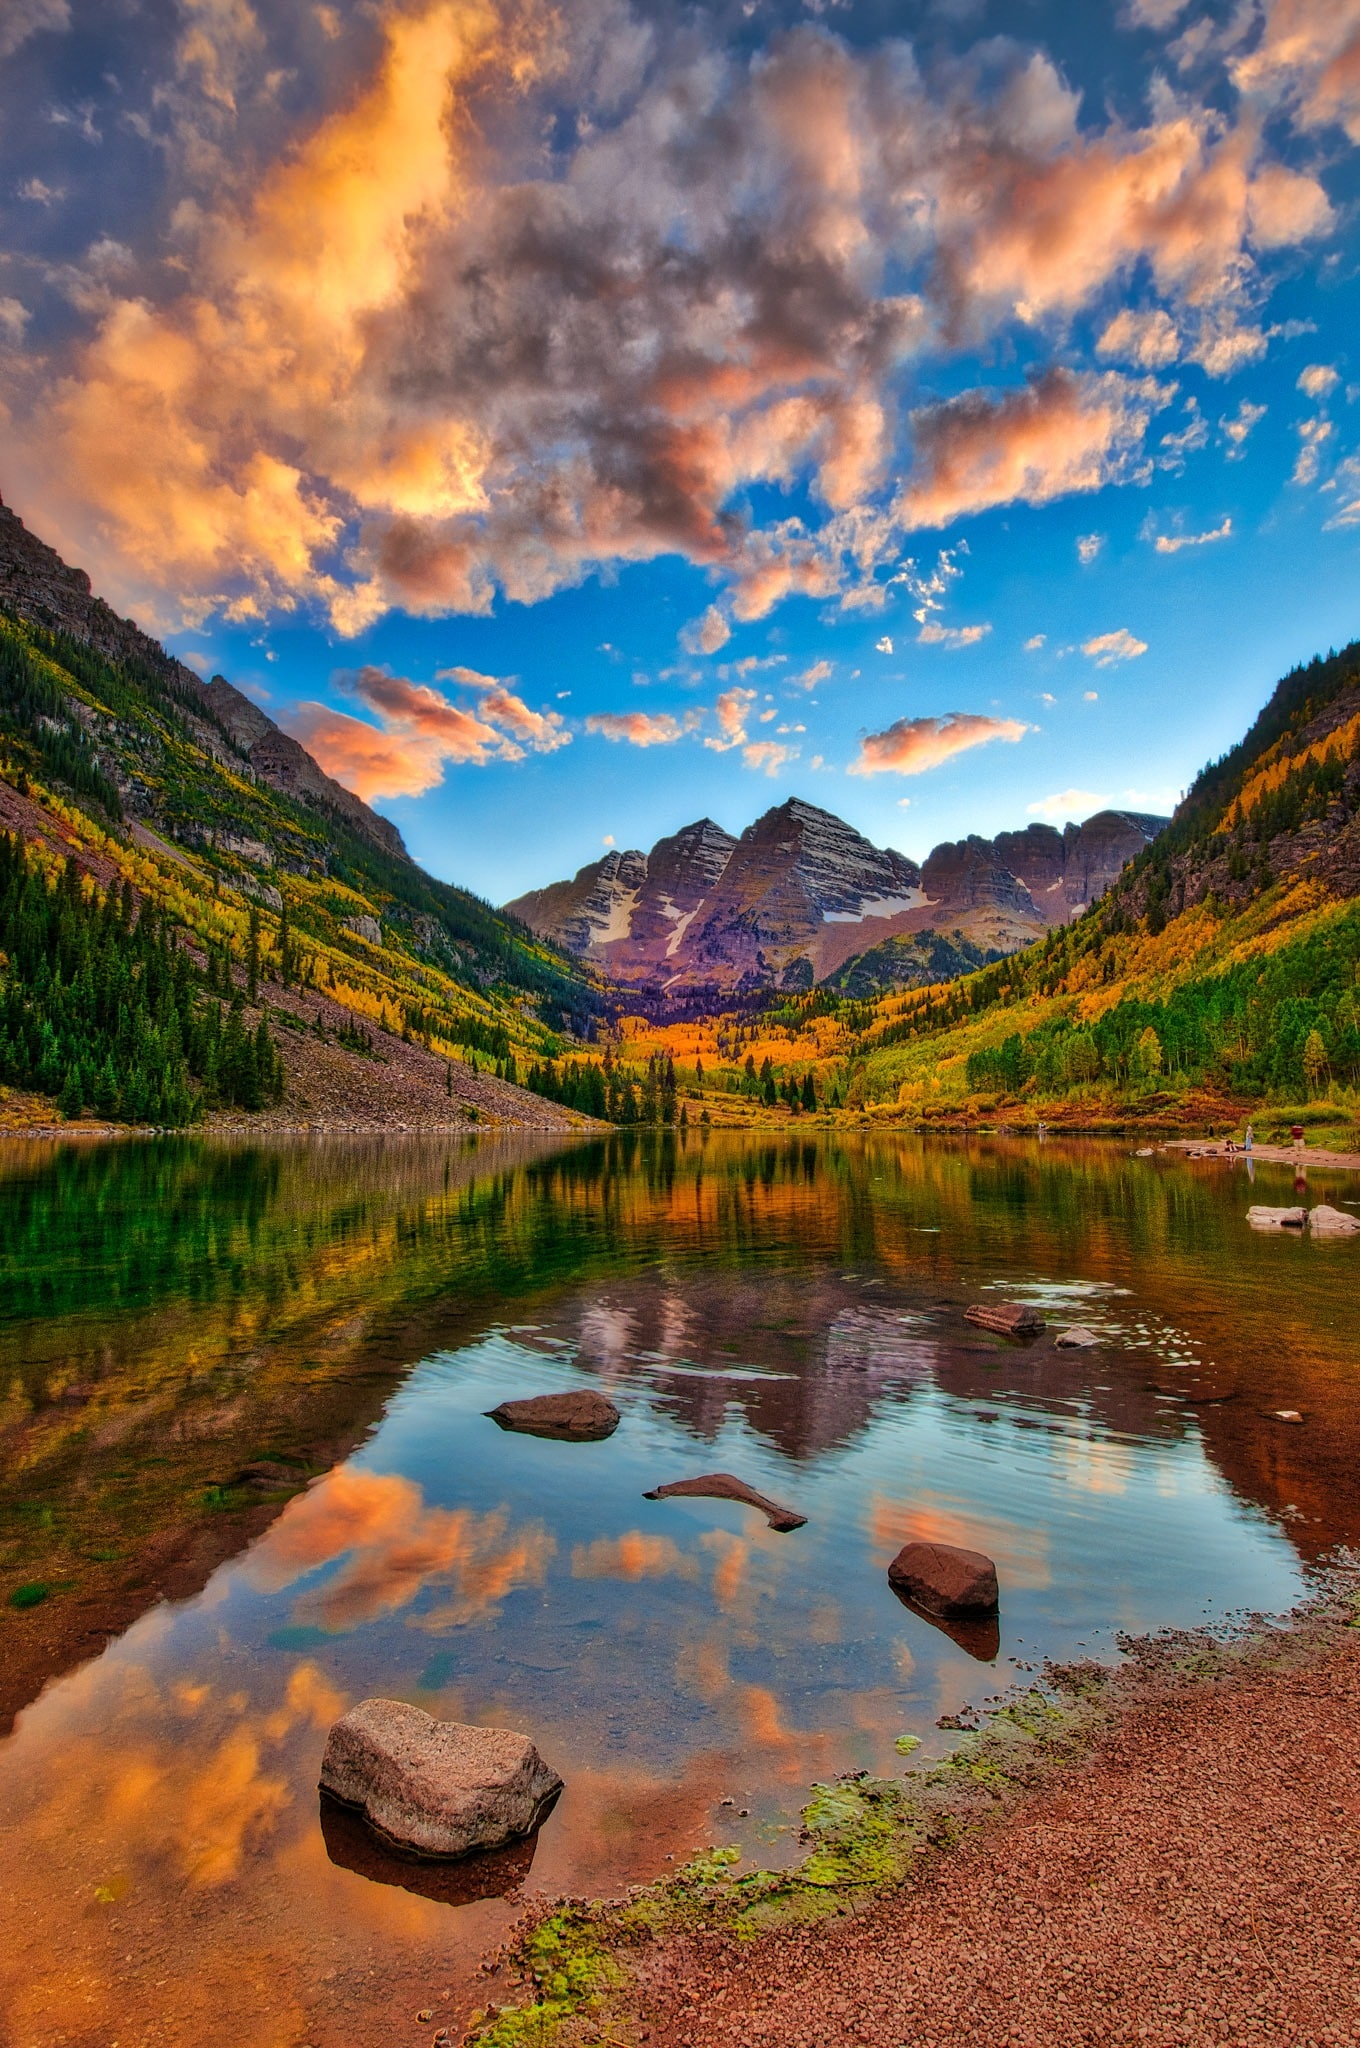 A colorful sunrise is reflected in the still waters of Maroon Lake in the Maroon Bells Recreation Arez near Aspen, Colorado.